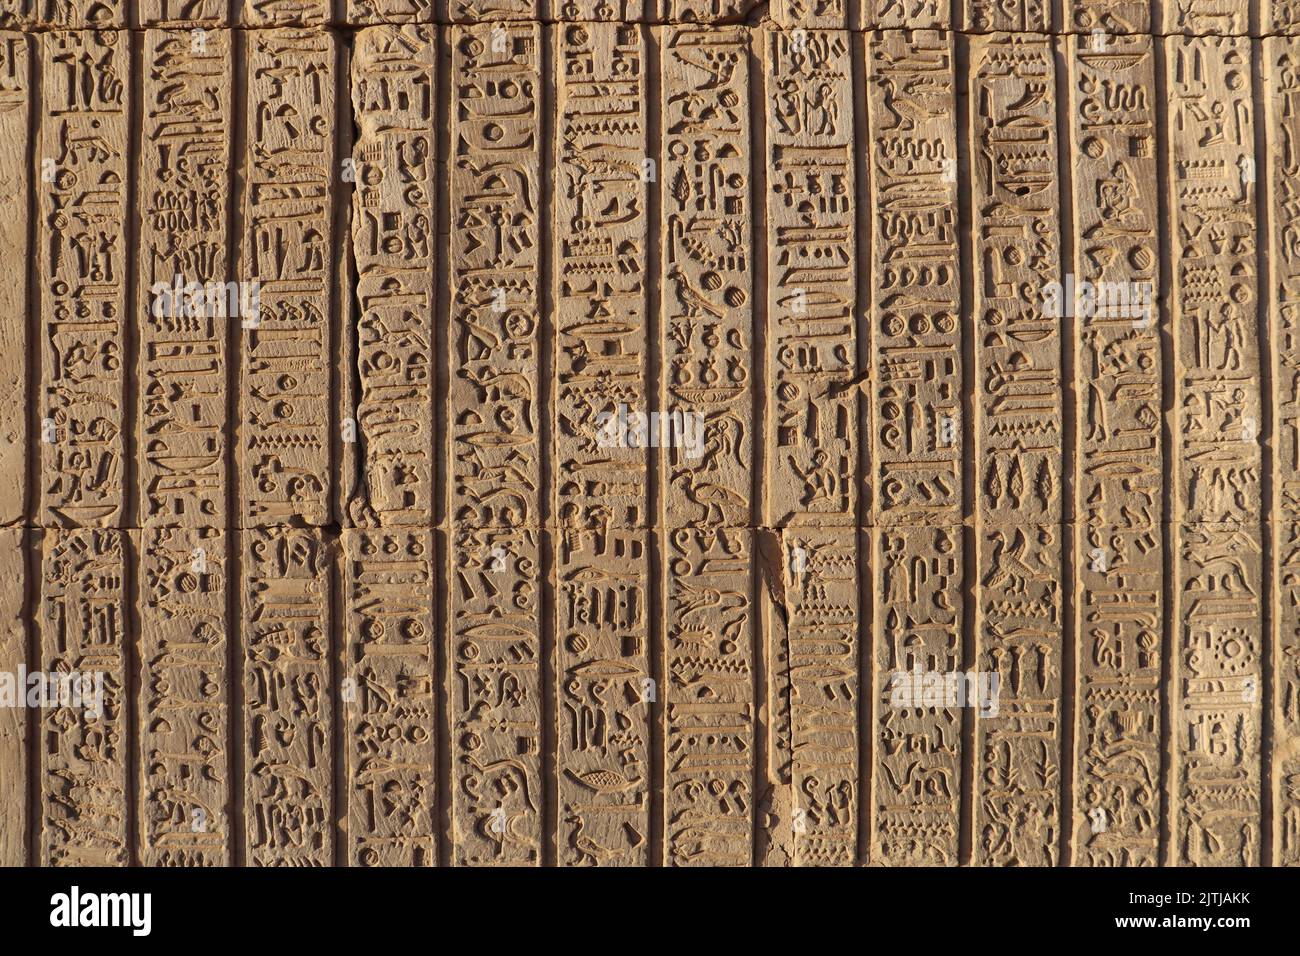 Ancient pharaonic hieroglyphs carved on walls of Kom Ombo temple in Aswan, Egypt Stock Photo